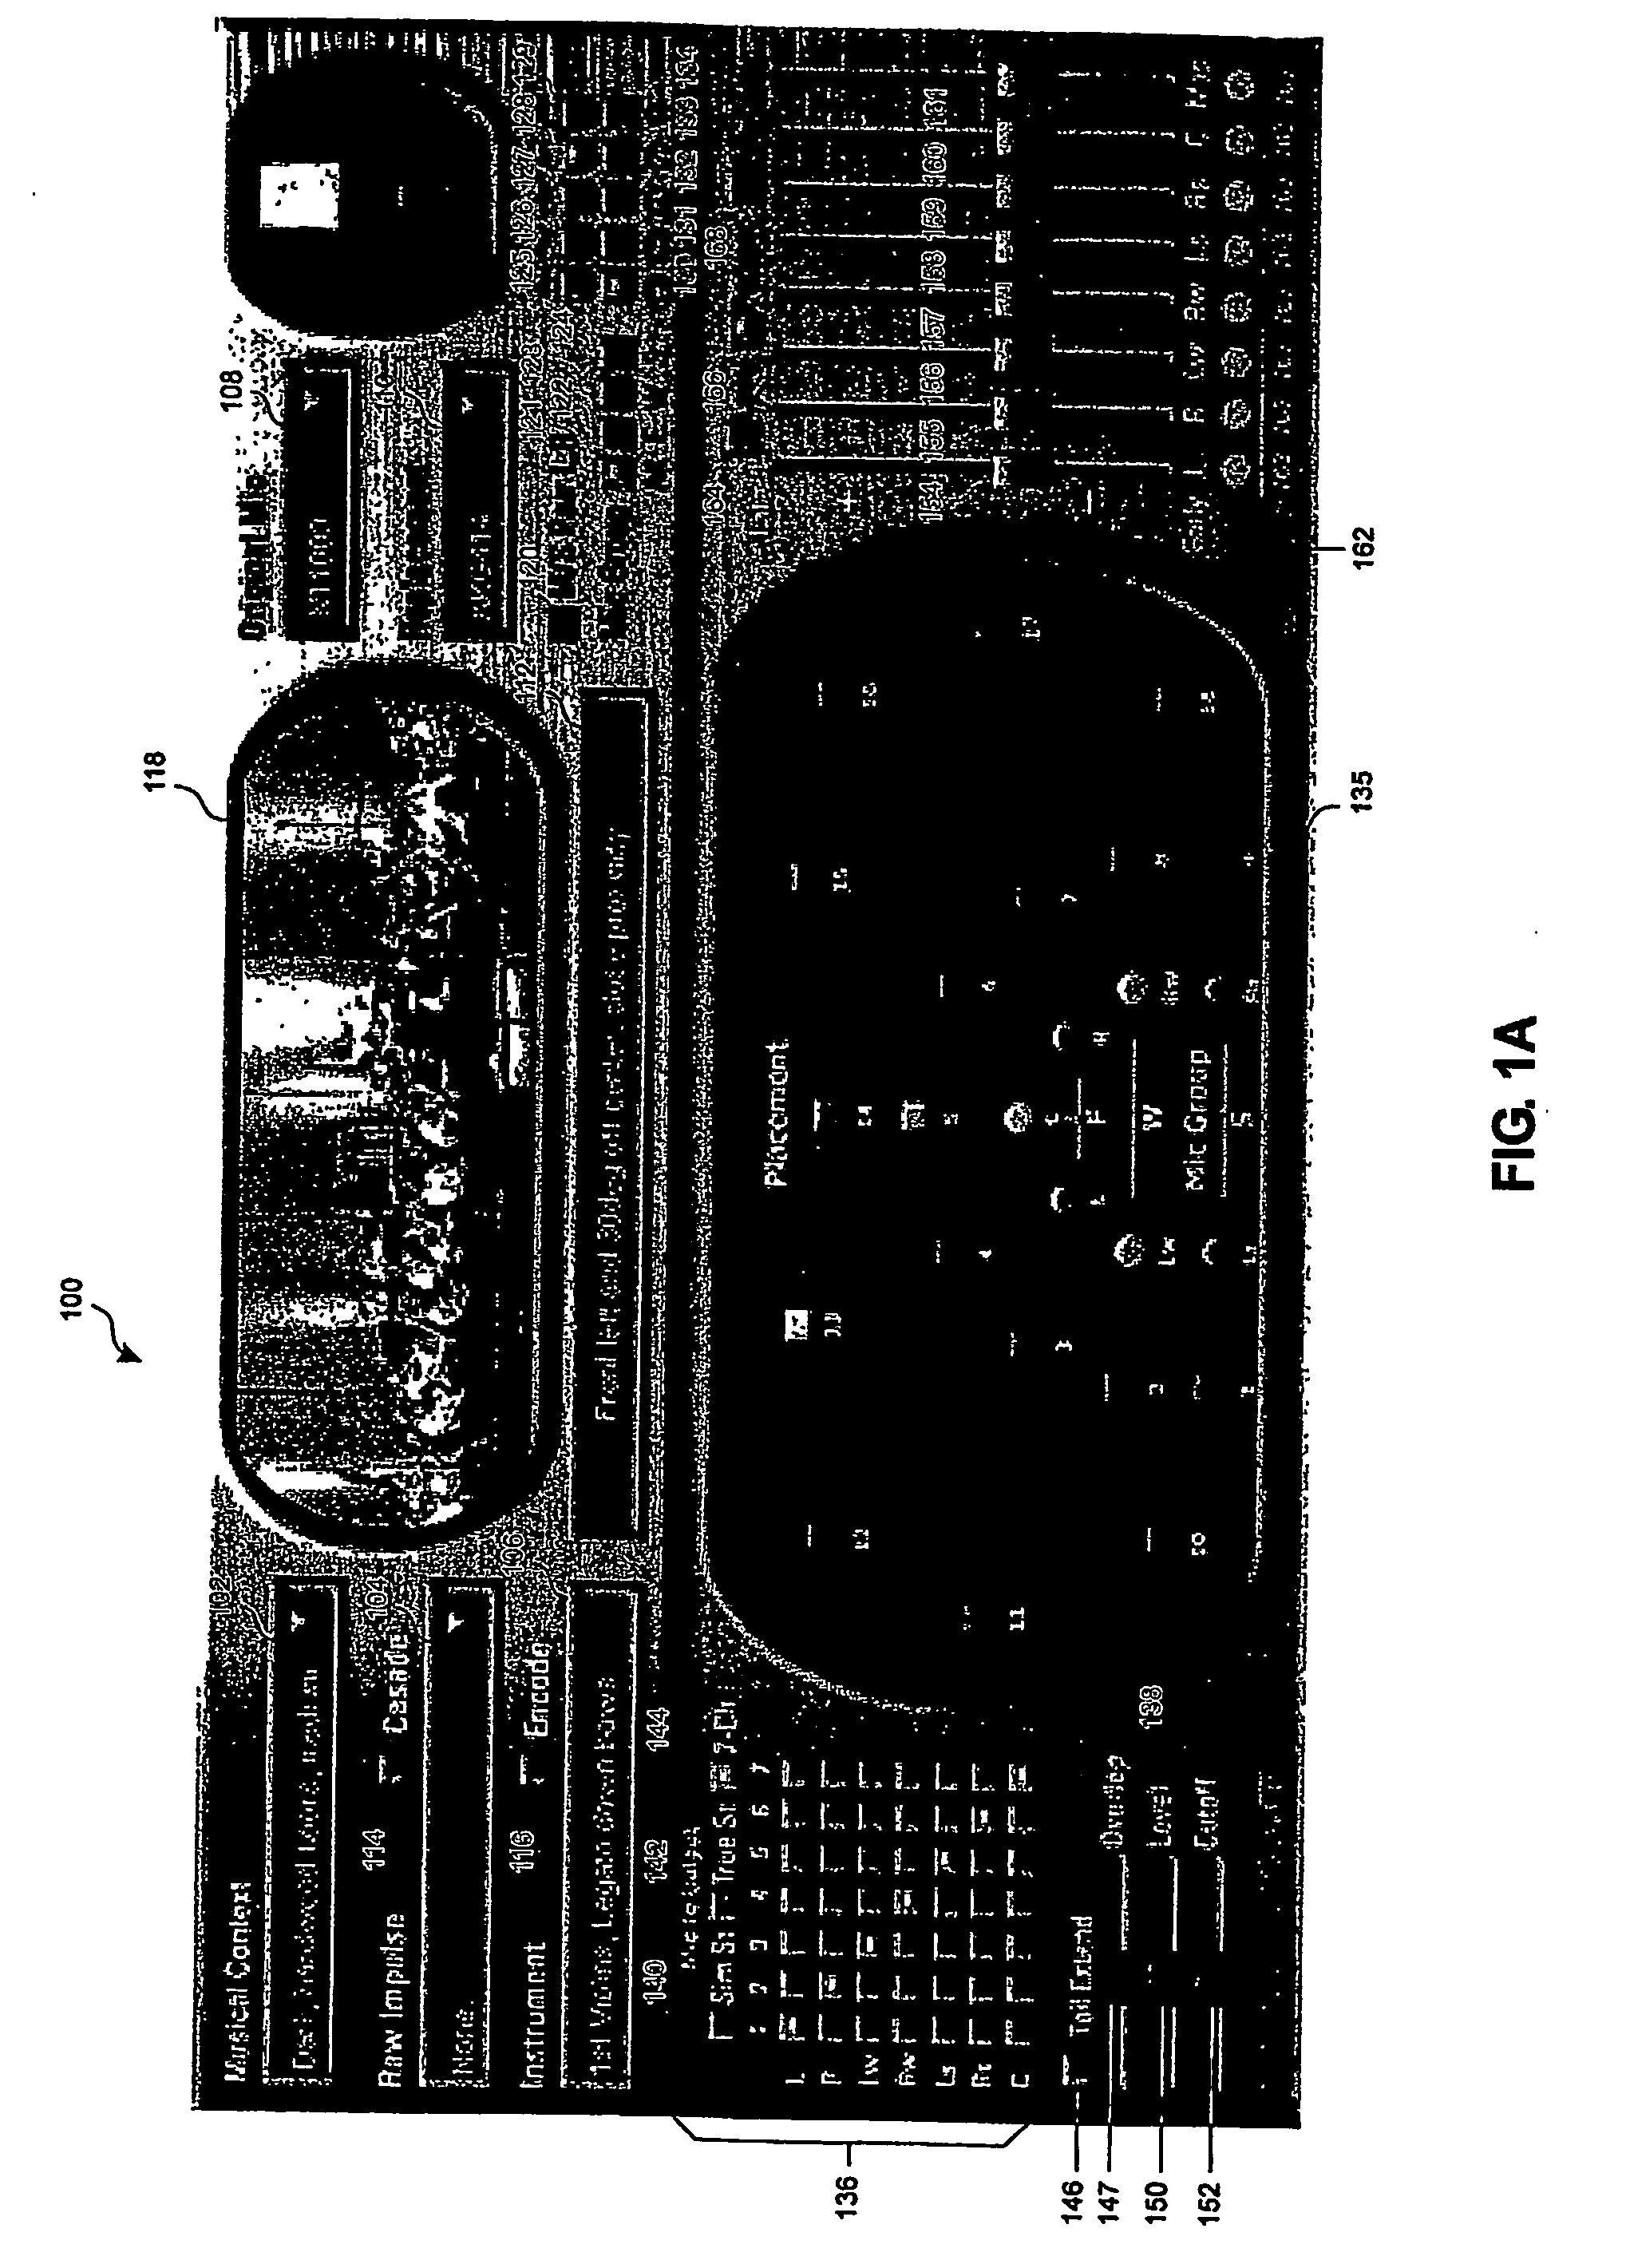 Method, apparatus and system for synthesizing an audio performance using Convolution at Multiple Sample Rates